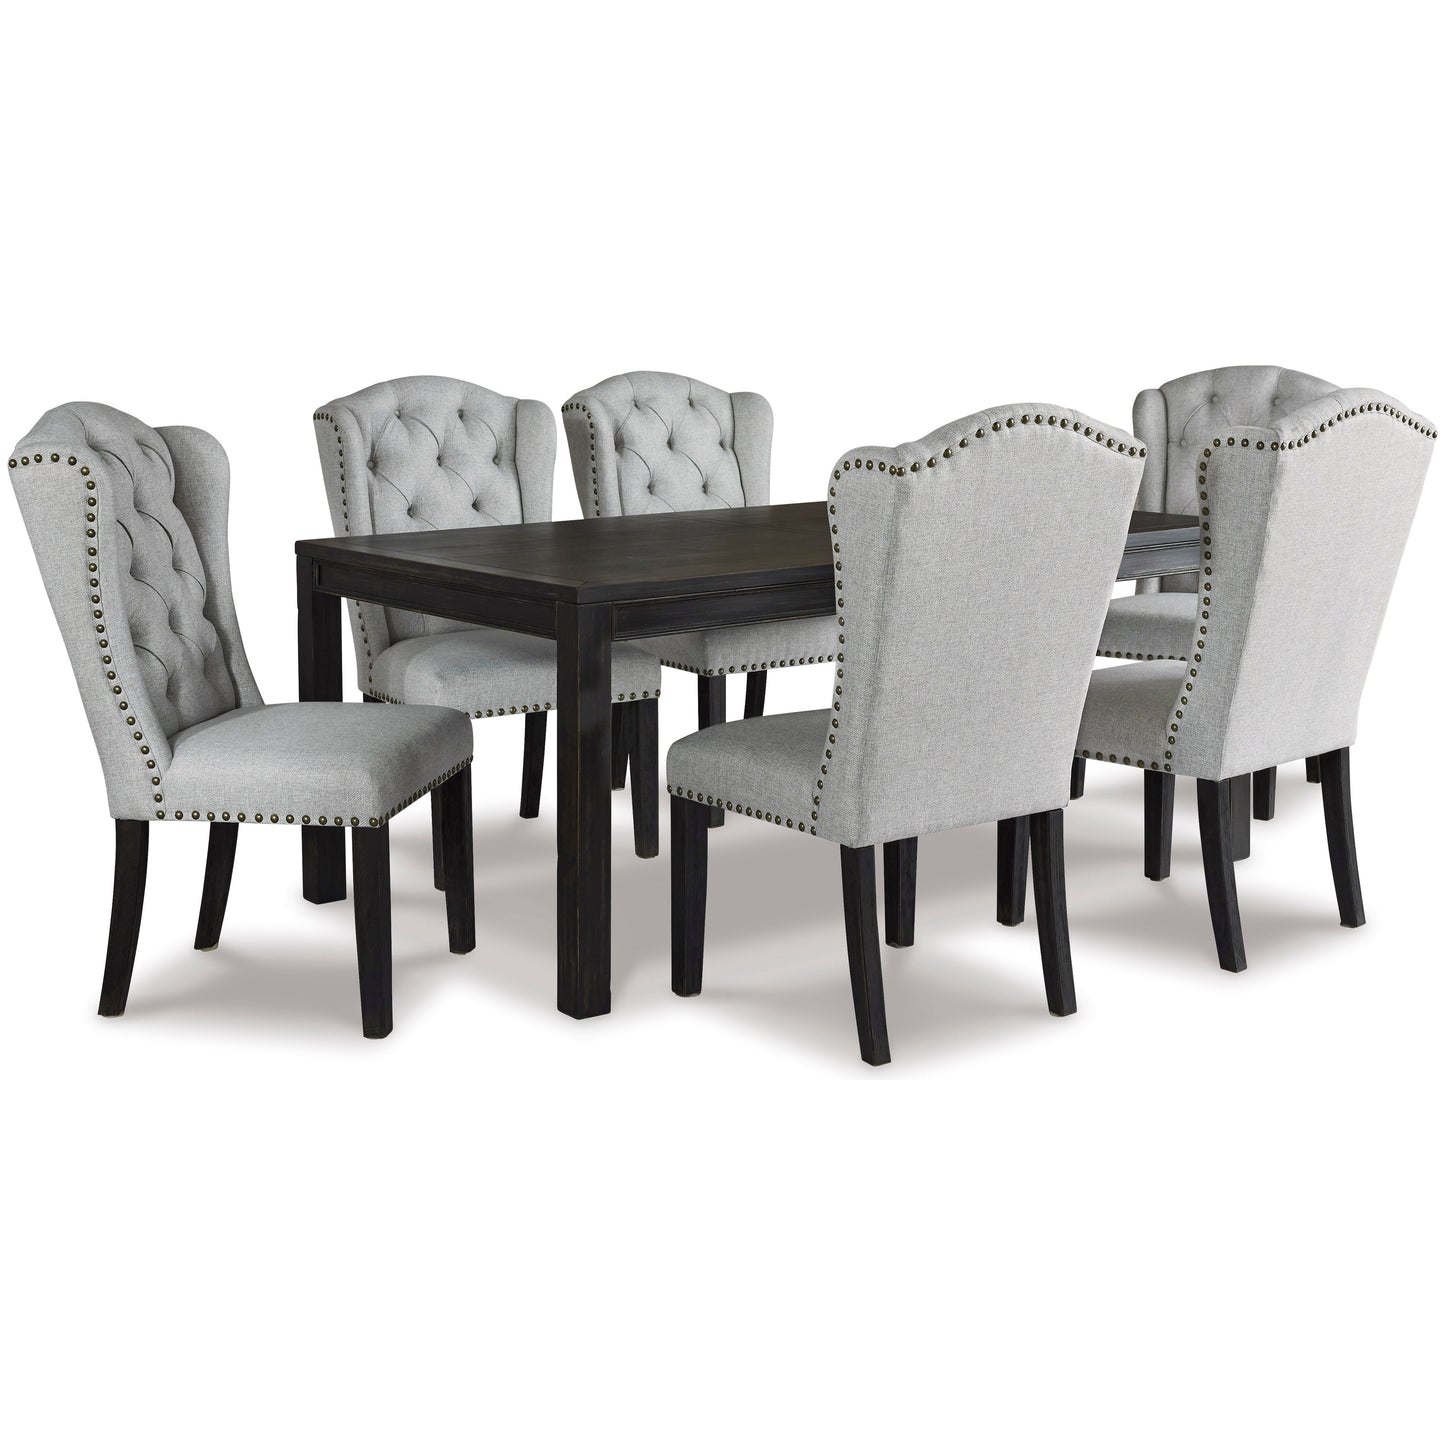 JEANETTE DINING SET - 6 CHAIRS & TABLE